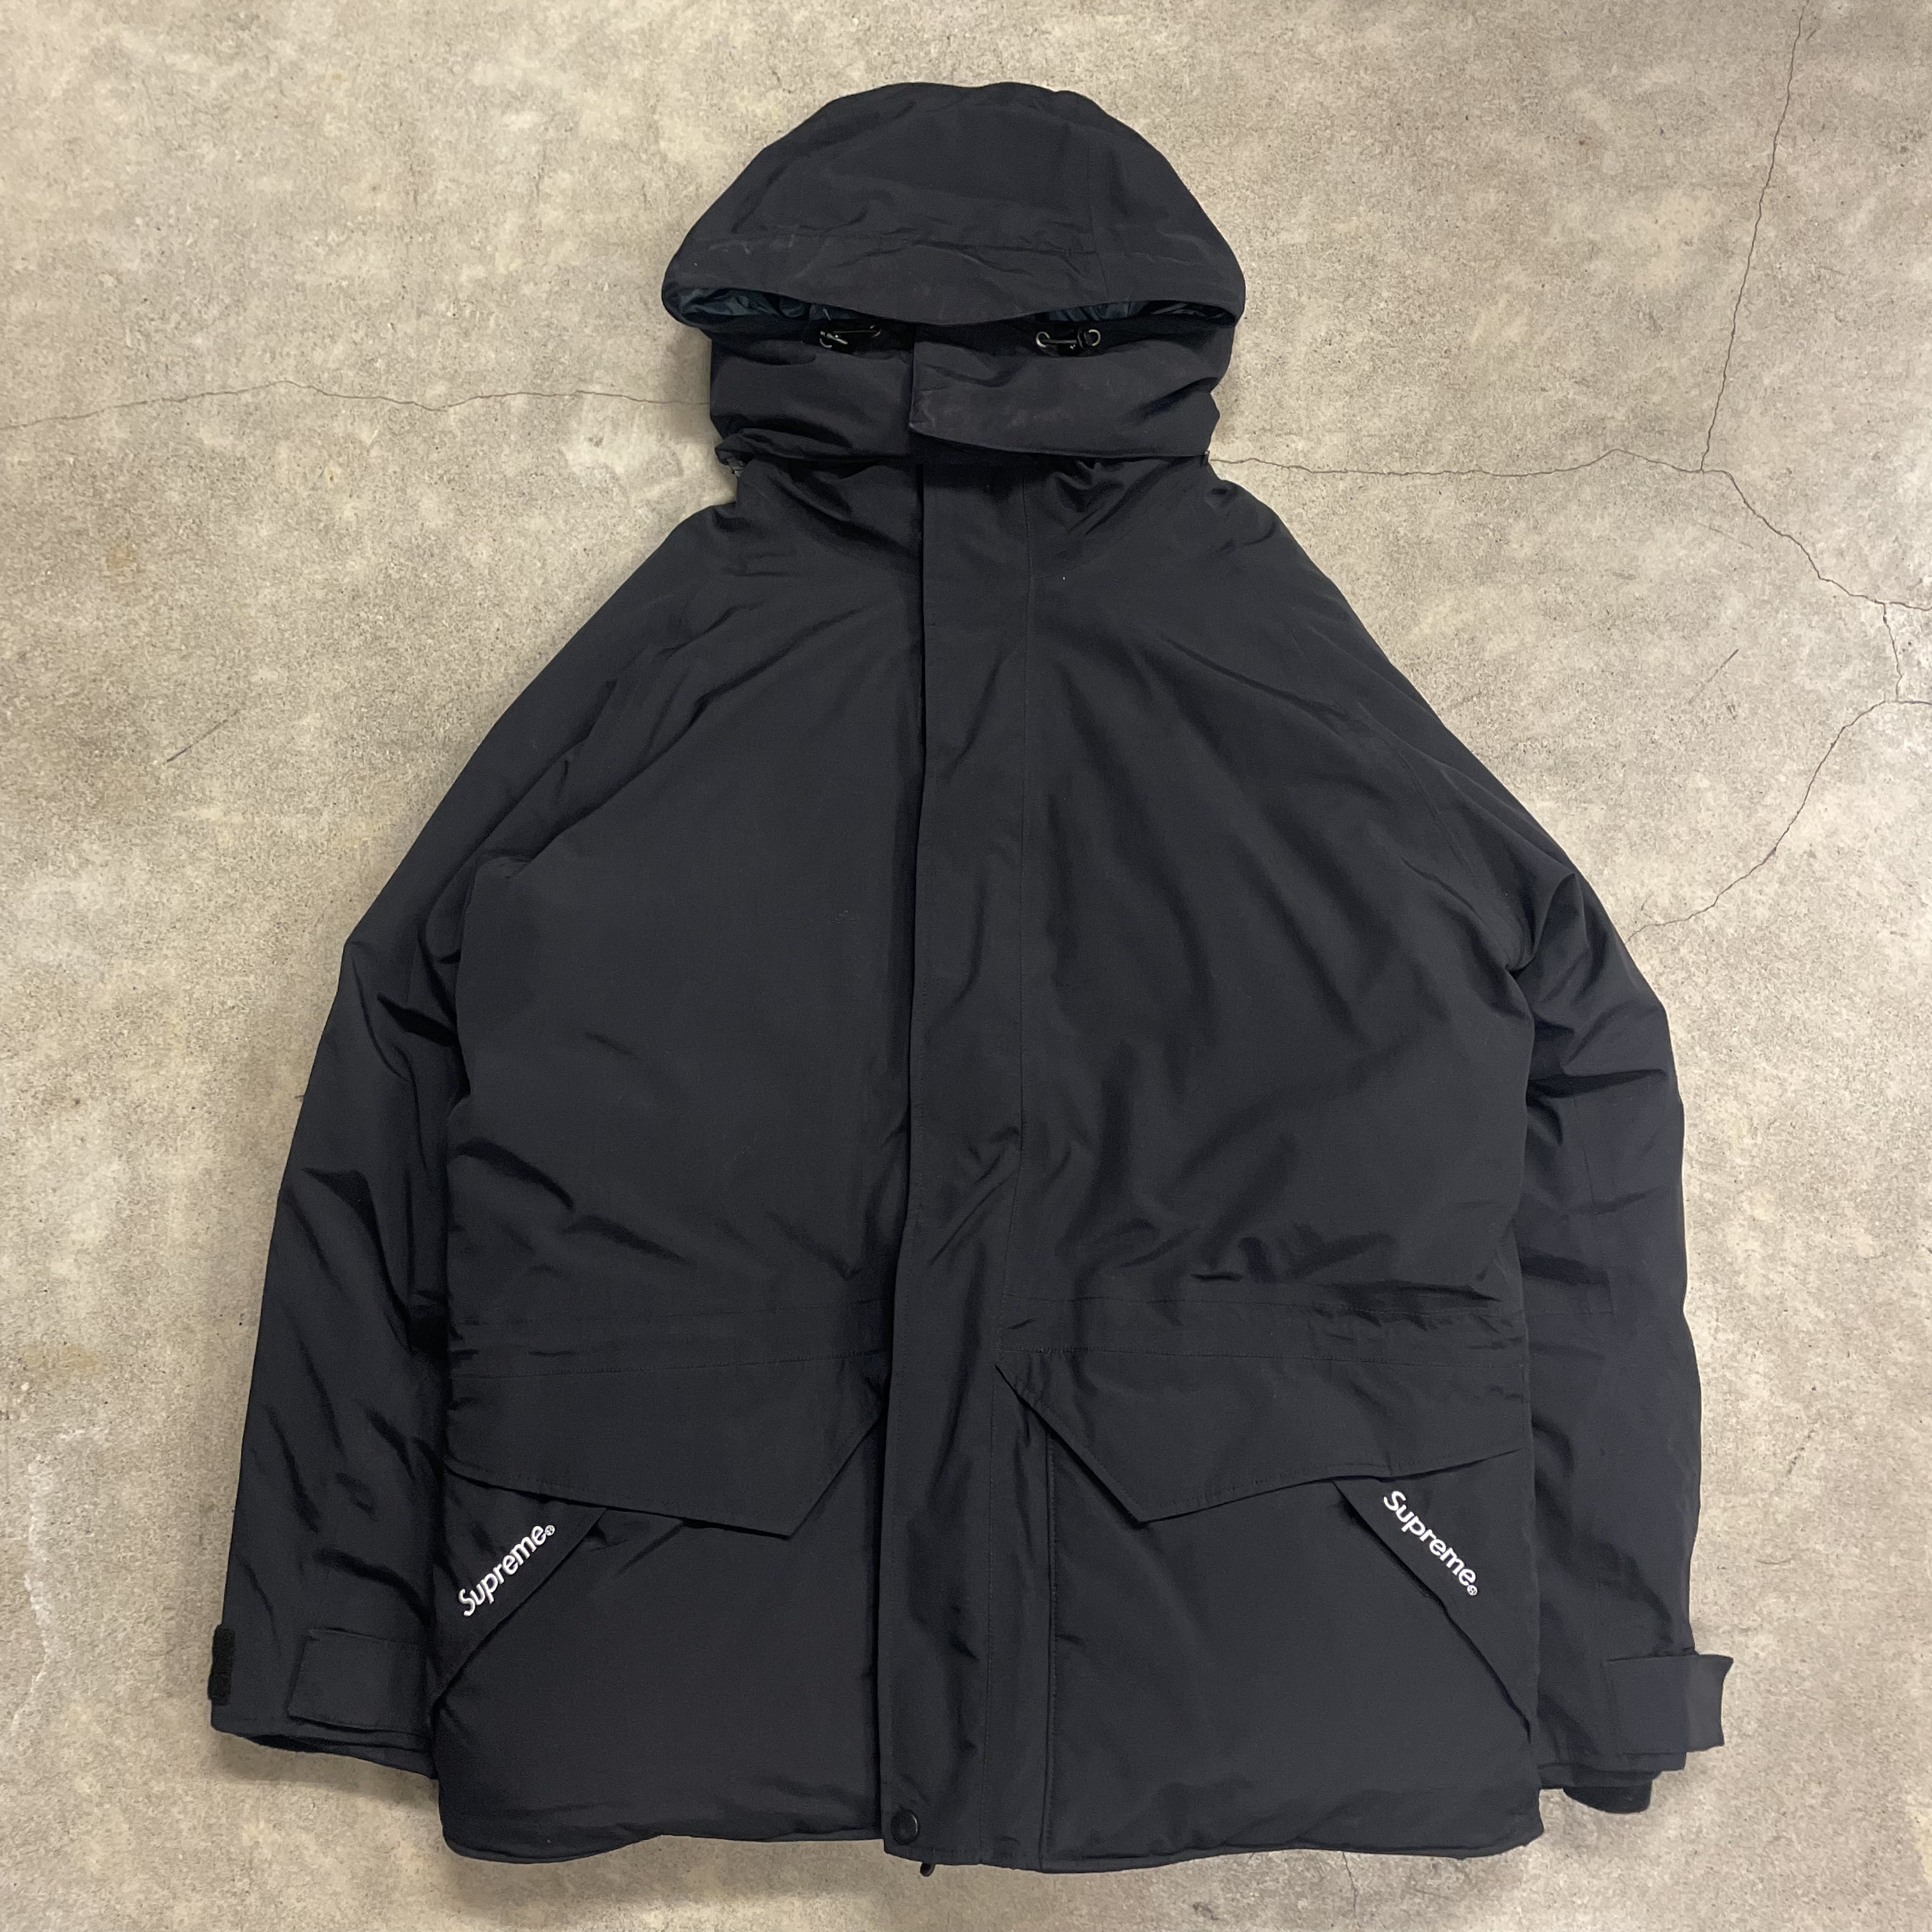 Supreme シュプリーム 15AW Uptown Down Parka 700Fill ダウン